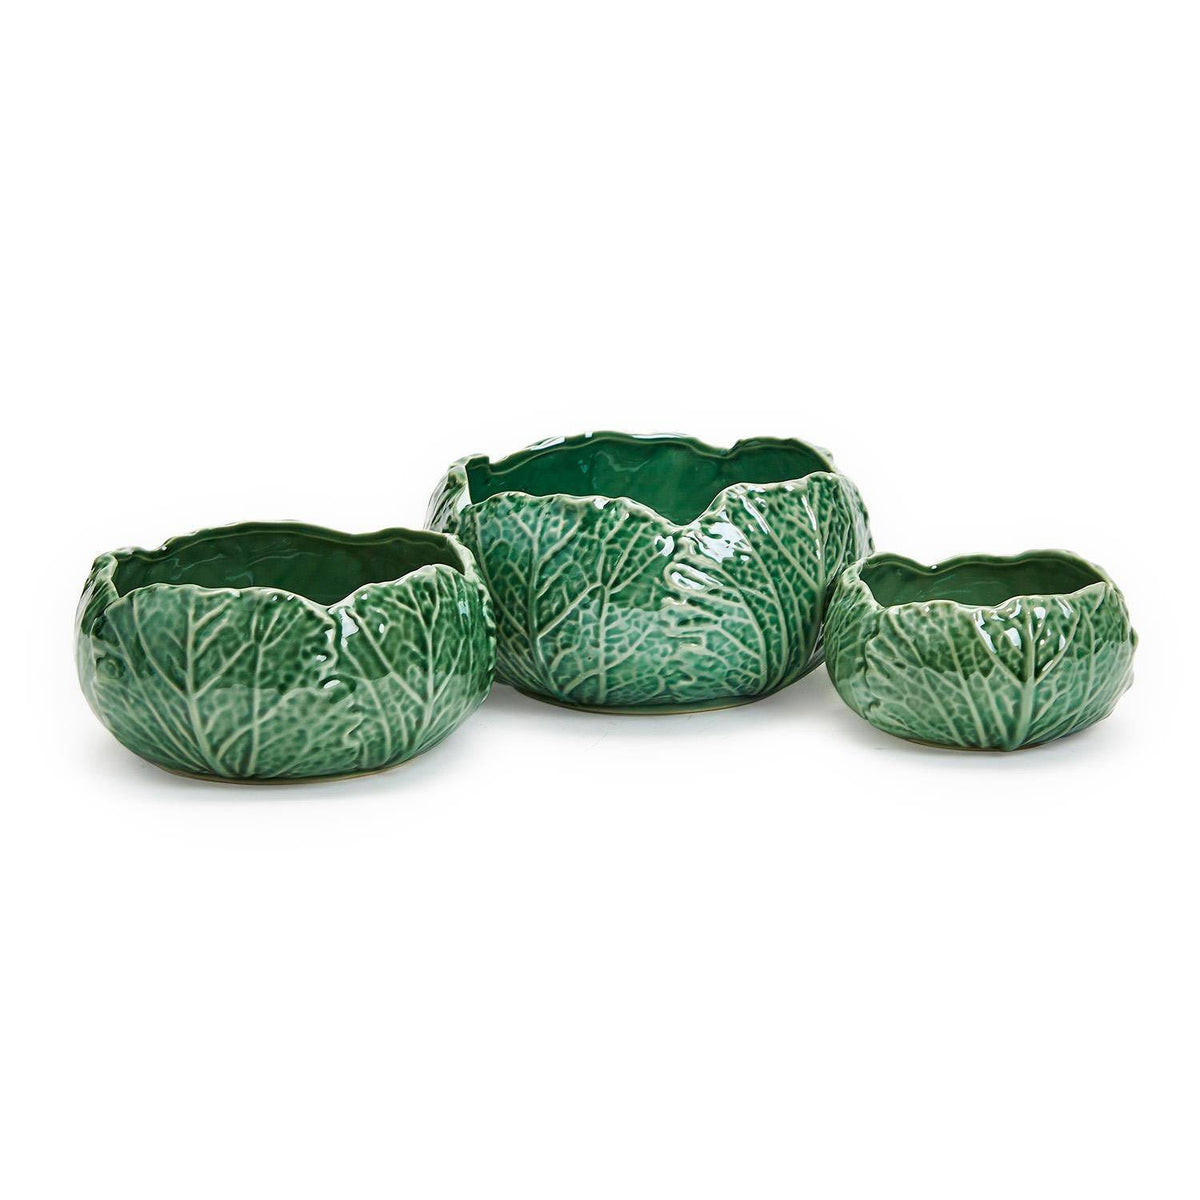 Cabbage Leaf Bowl - 3 sizes available - The Preppy Bunny